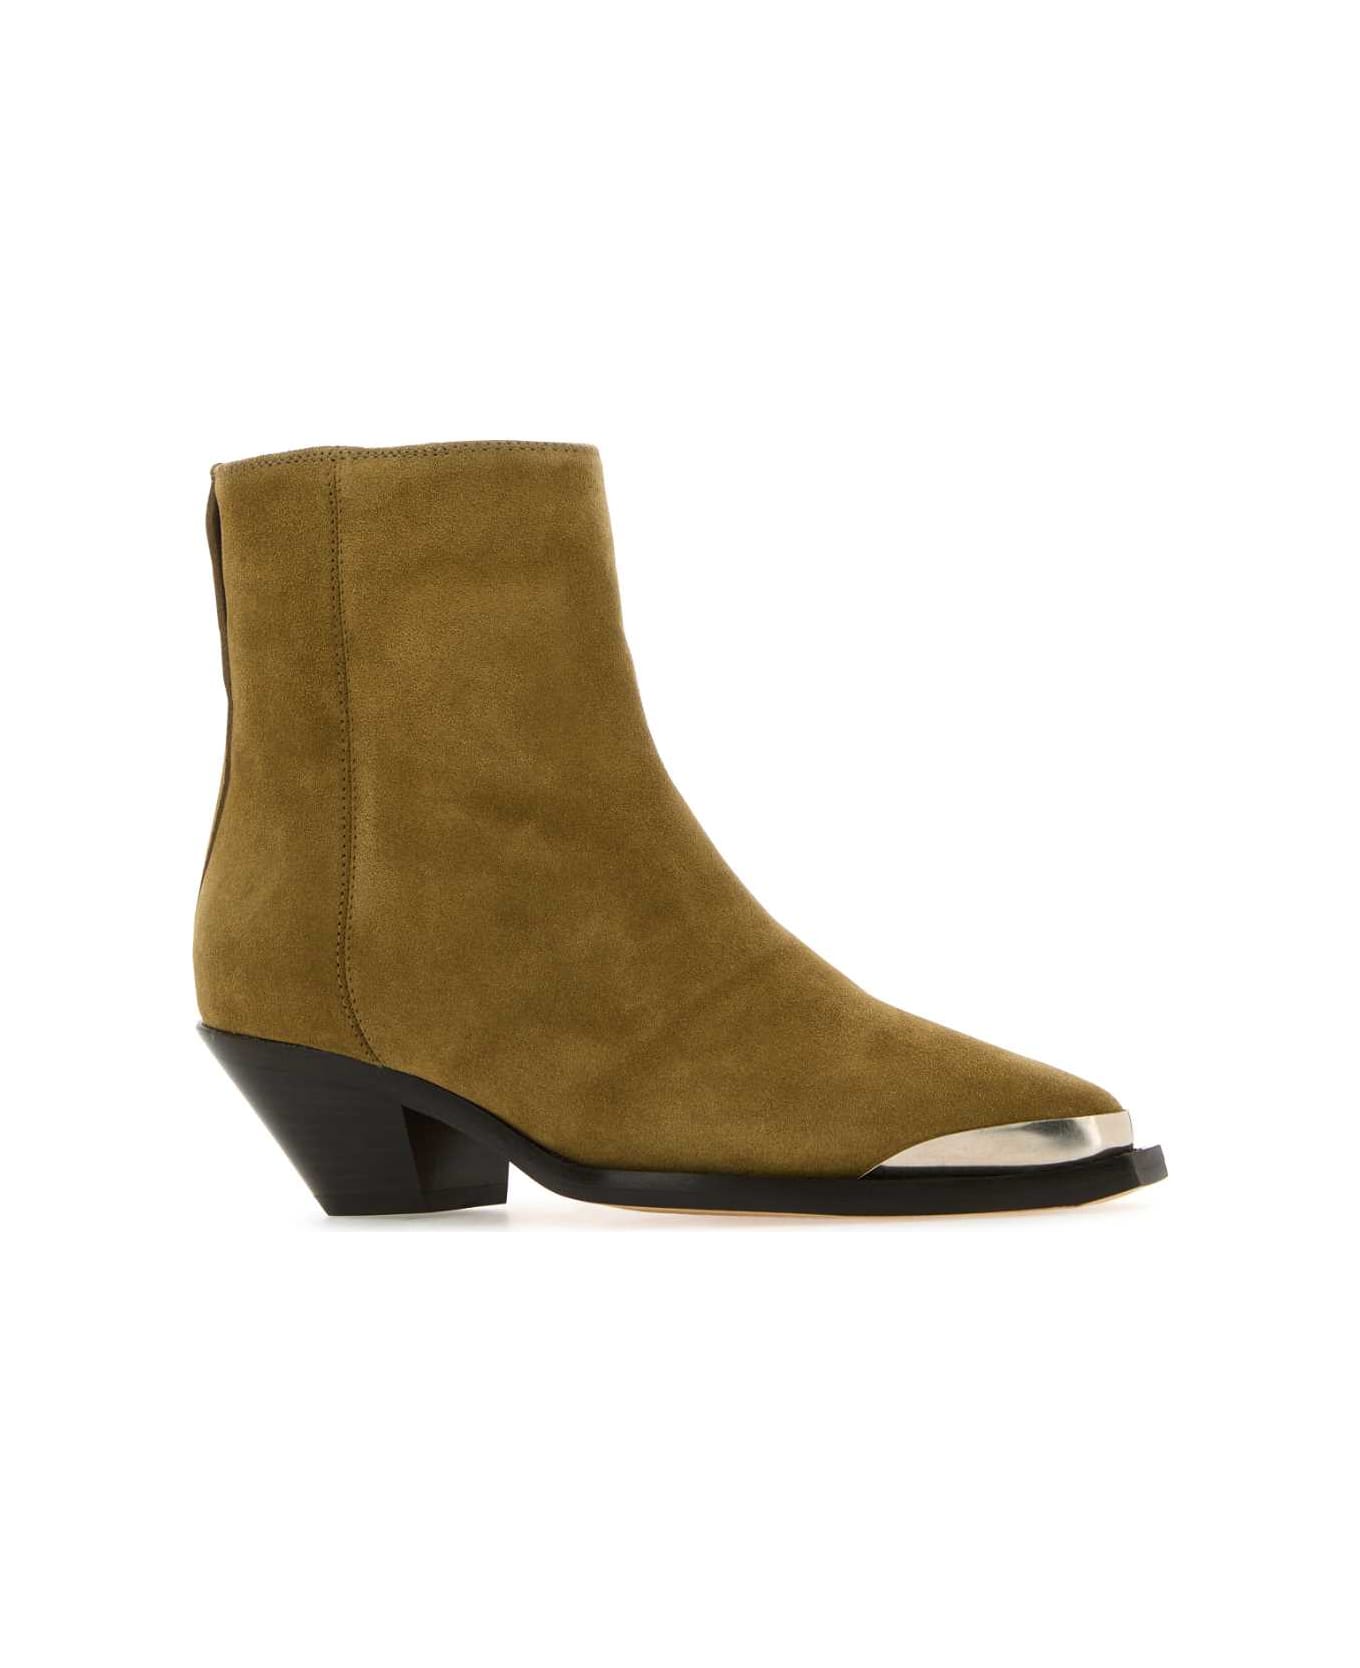 Isabel Marant Adnae Ankle Boots - TAUPE